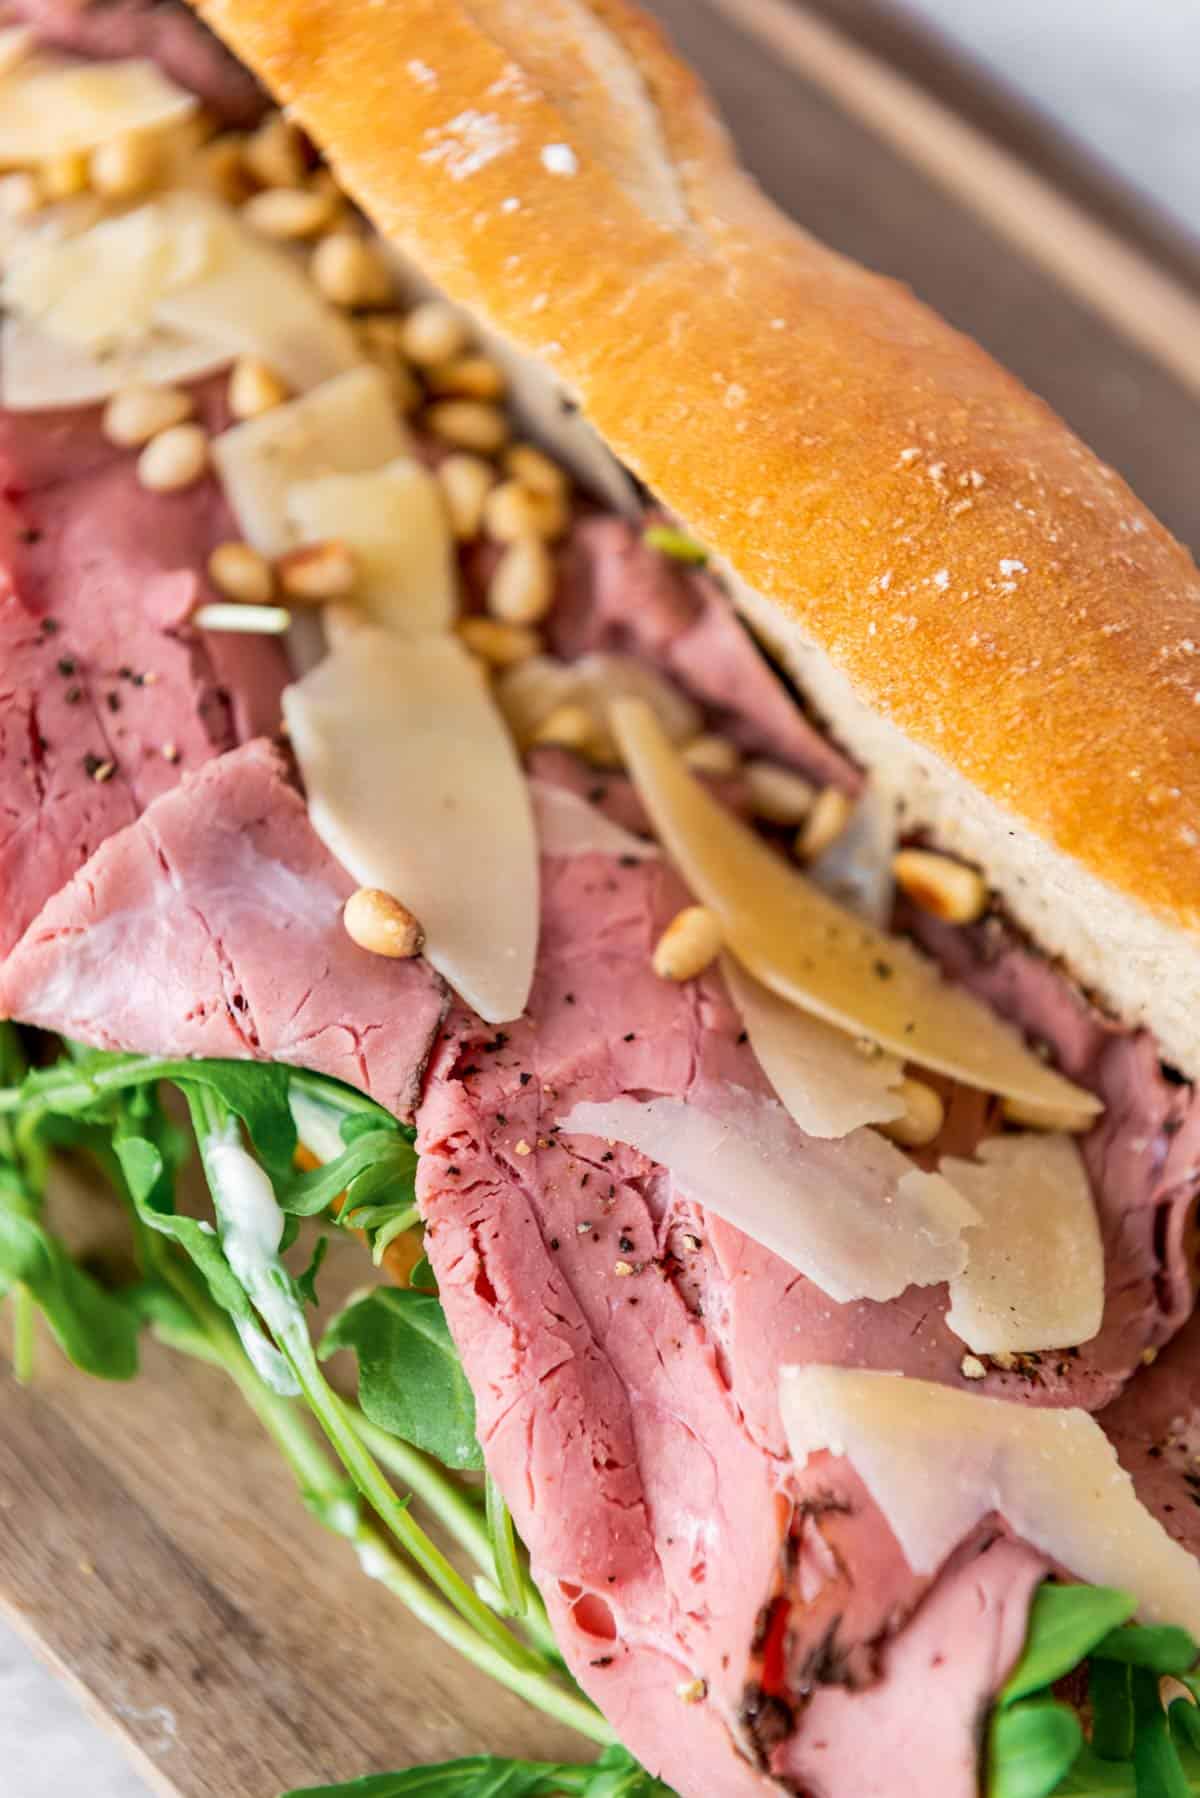 Deli Style Cold Roast Beef Sandwiches With truffle mayonnaise Sauce